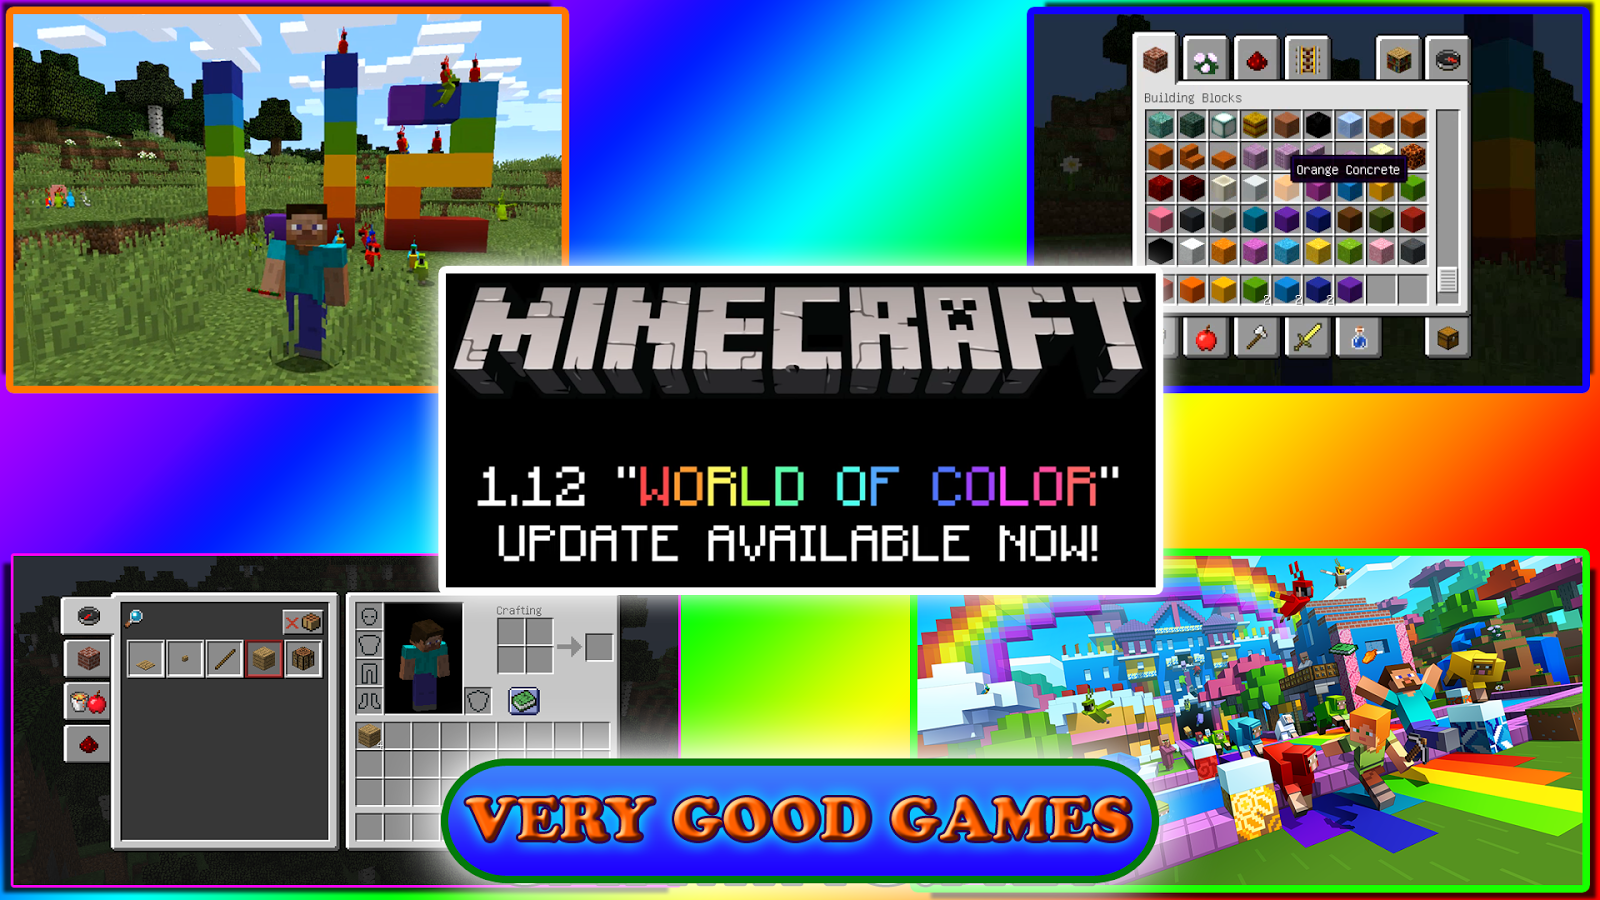 A banner for the news about a new version of Minecraft - the World of Color, Minecraft 1.12